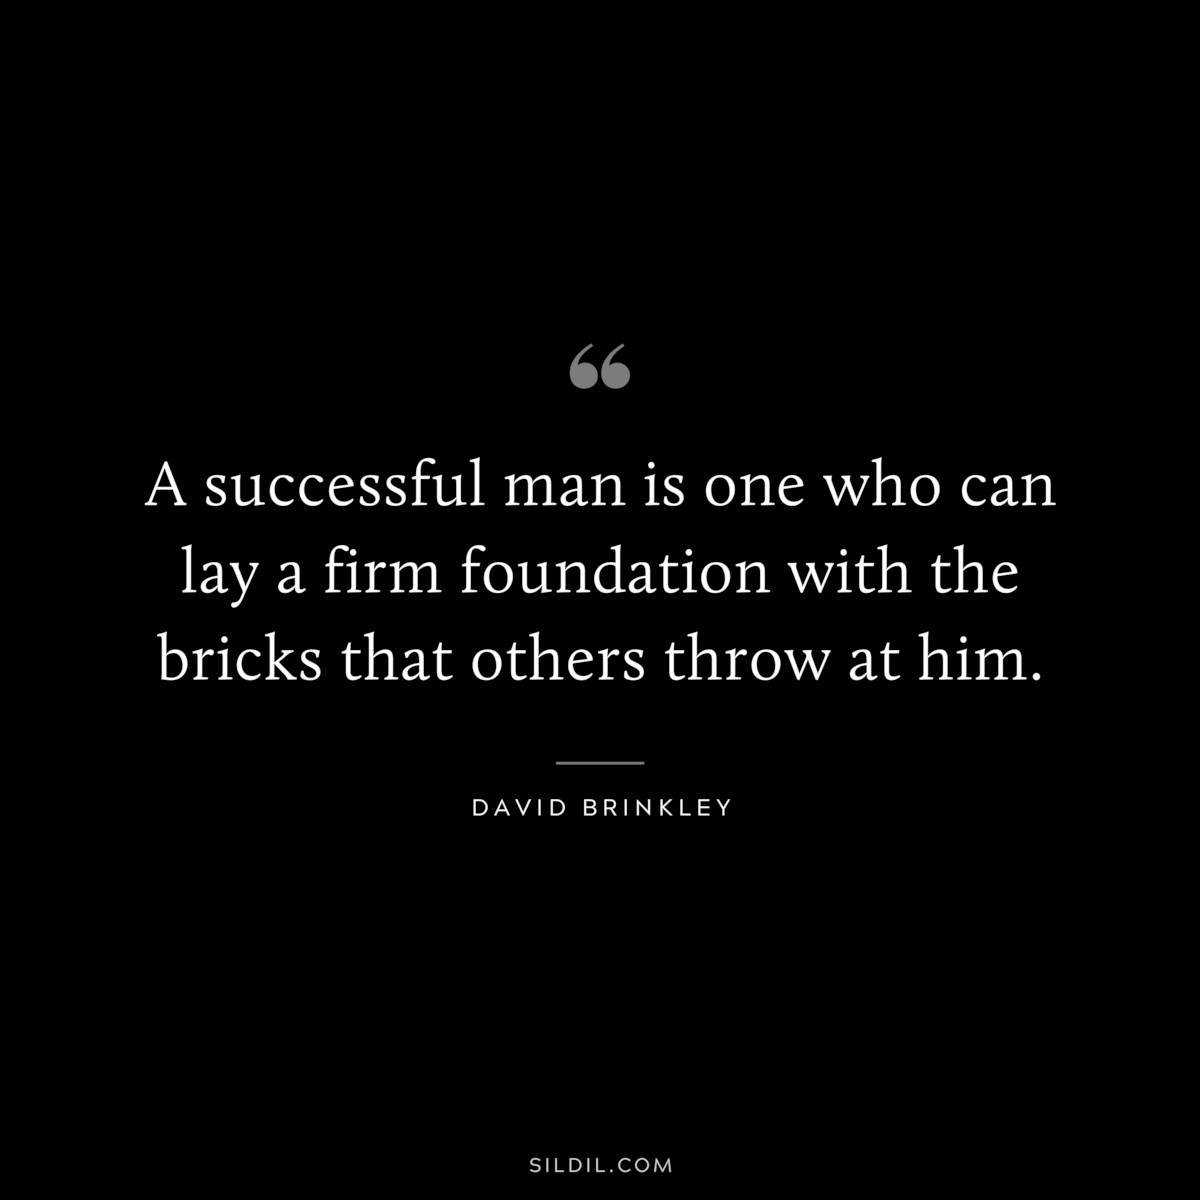 A successful man is one who can lay a firm foundation with the bricks that others throw at him. ― David Brinkley